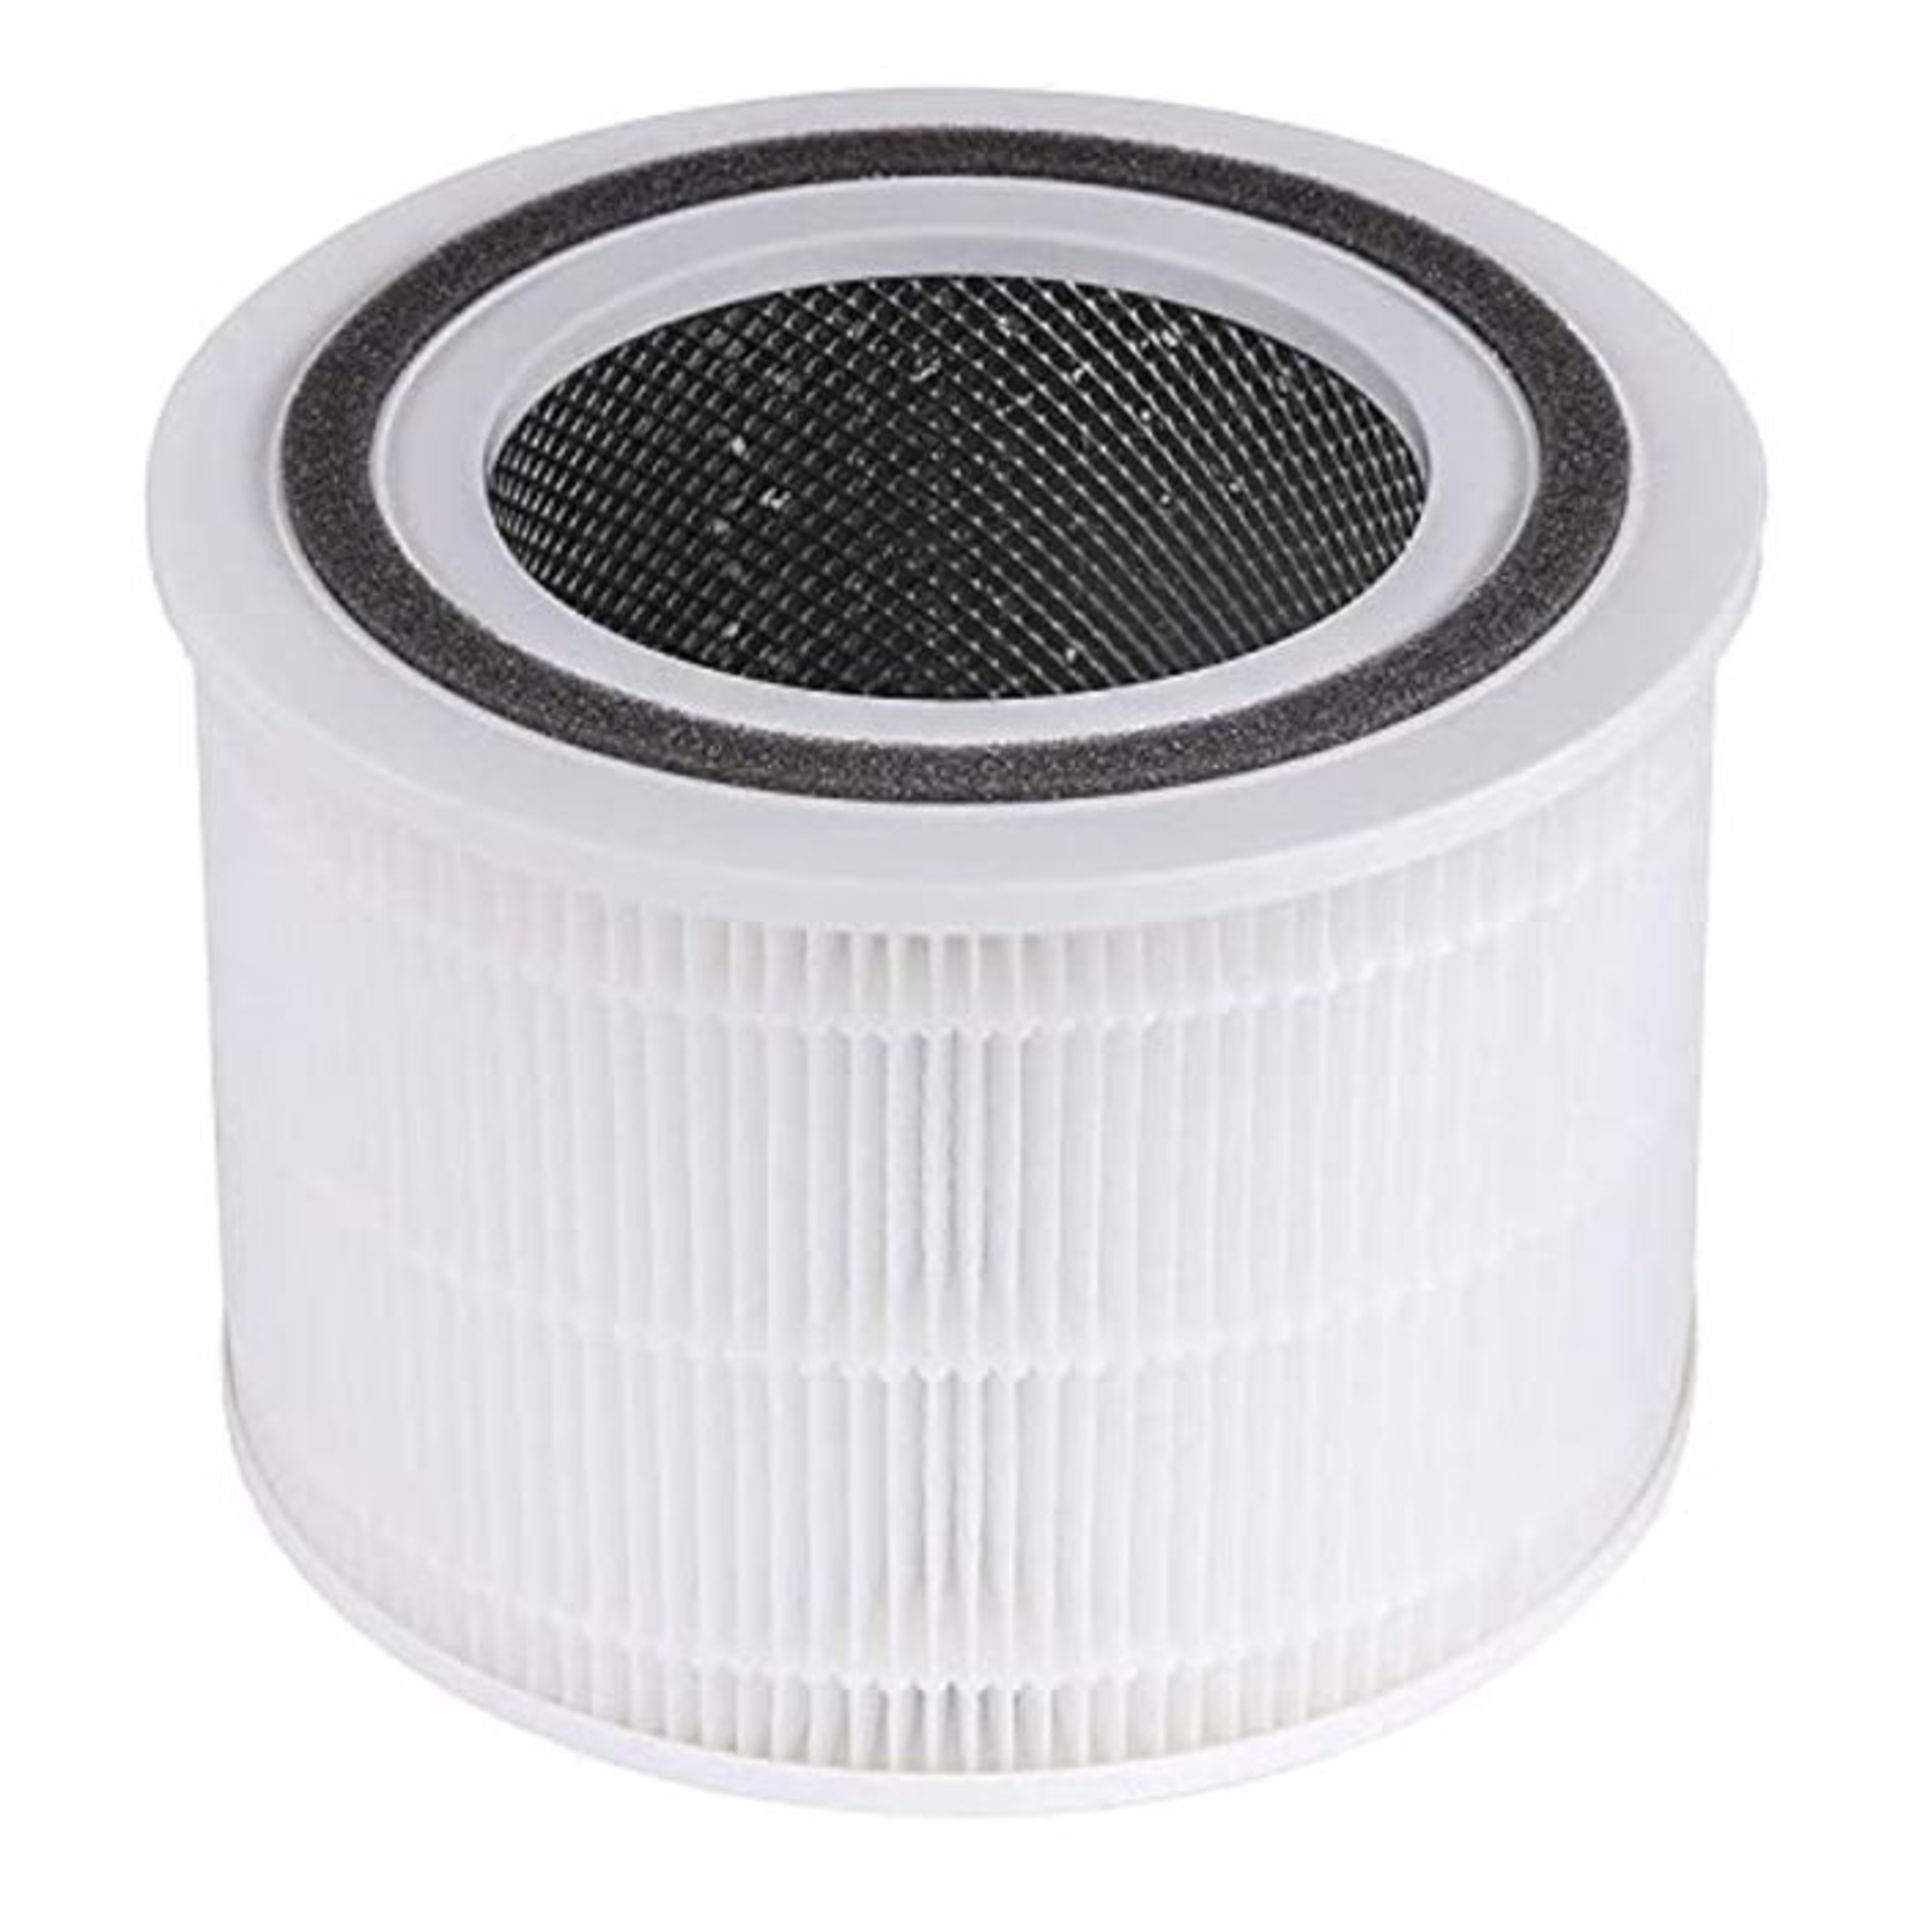 LEVOIT Air Purifier Replacement Filter, 3-in-1 H13 HEPA, High-Efficiency Activated Car